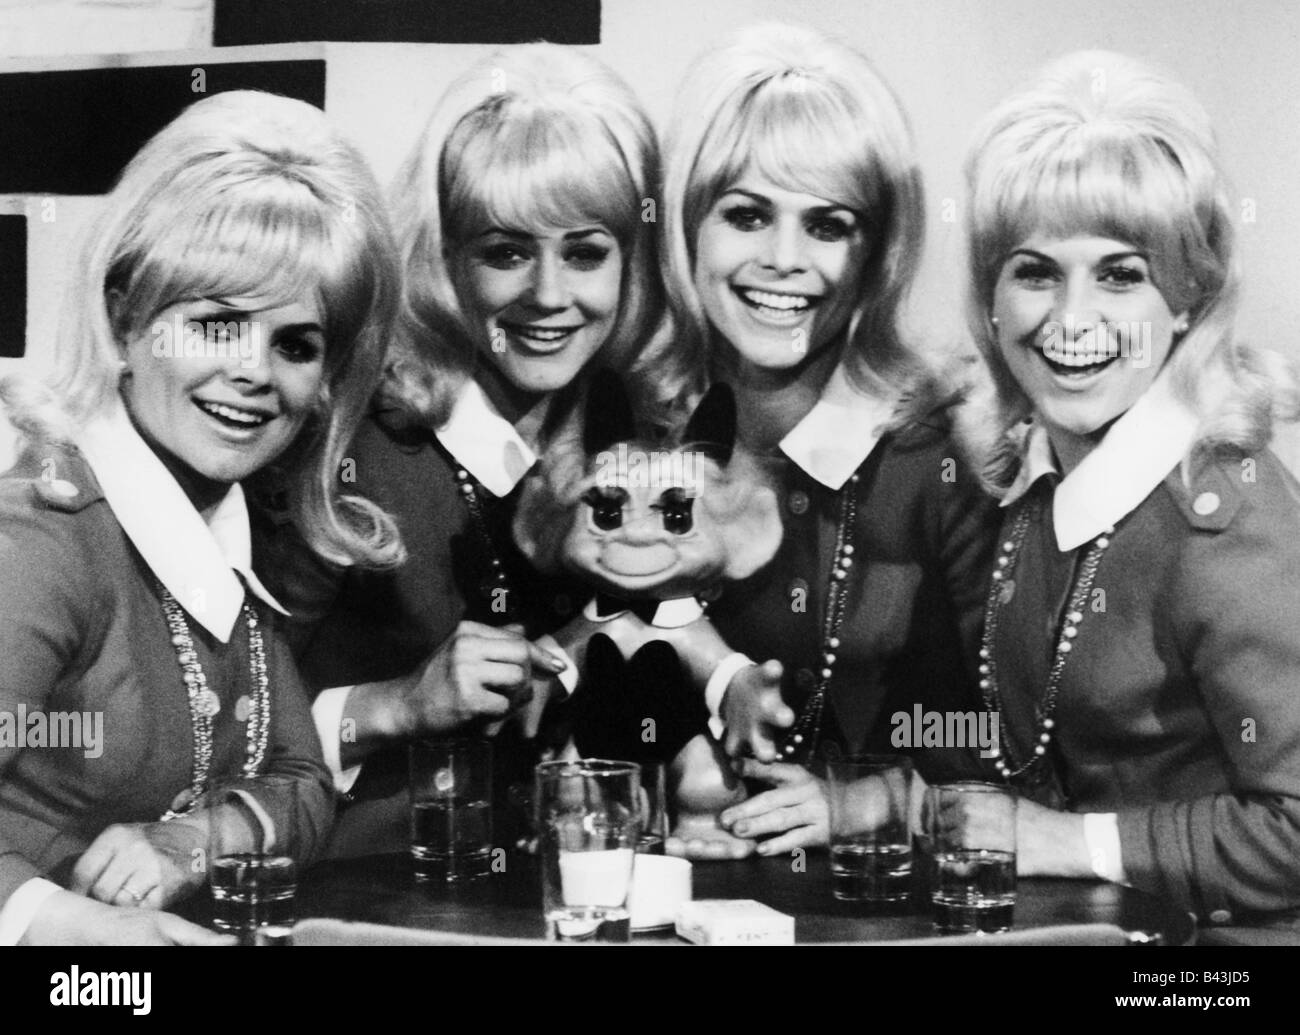 Jacob Sisters, German music group, half length, in TV show 'Meine Melodie', 23.6.1969, , Stock Photo